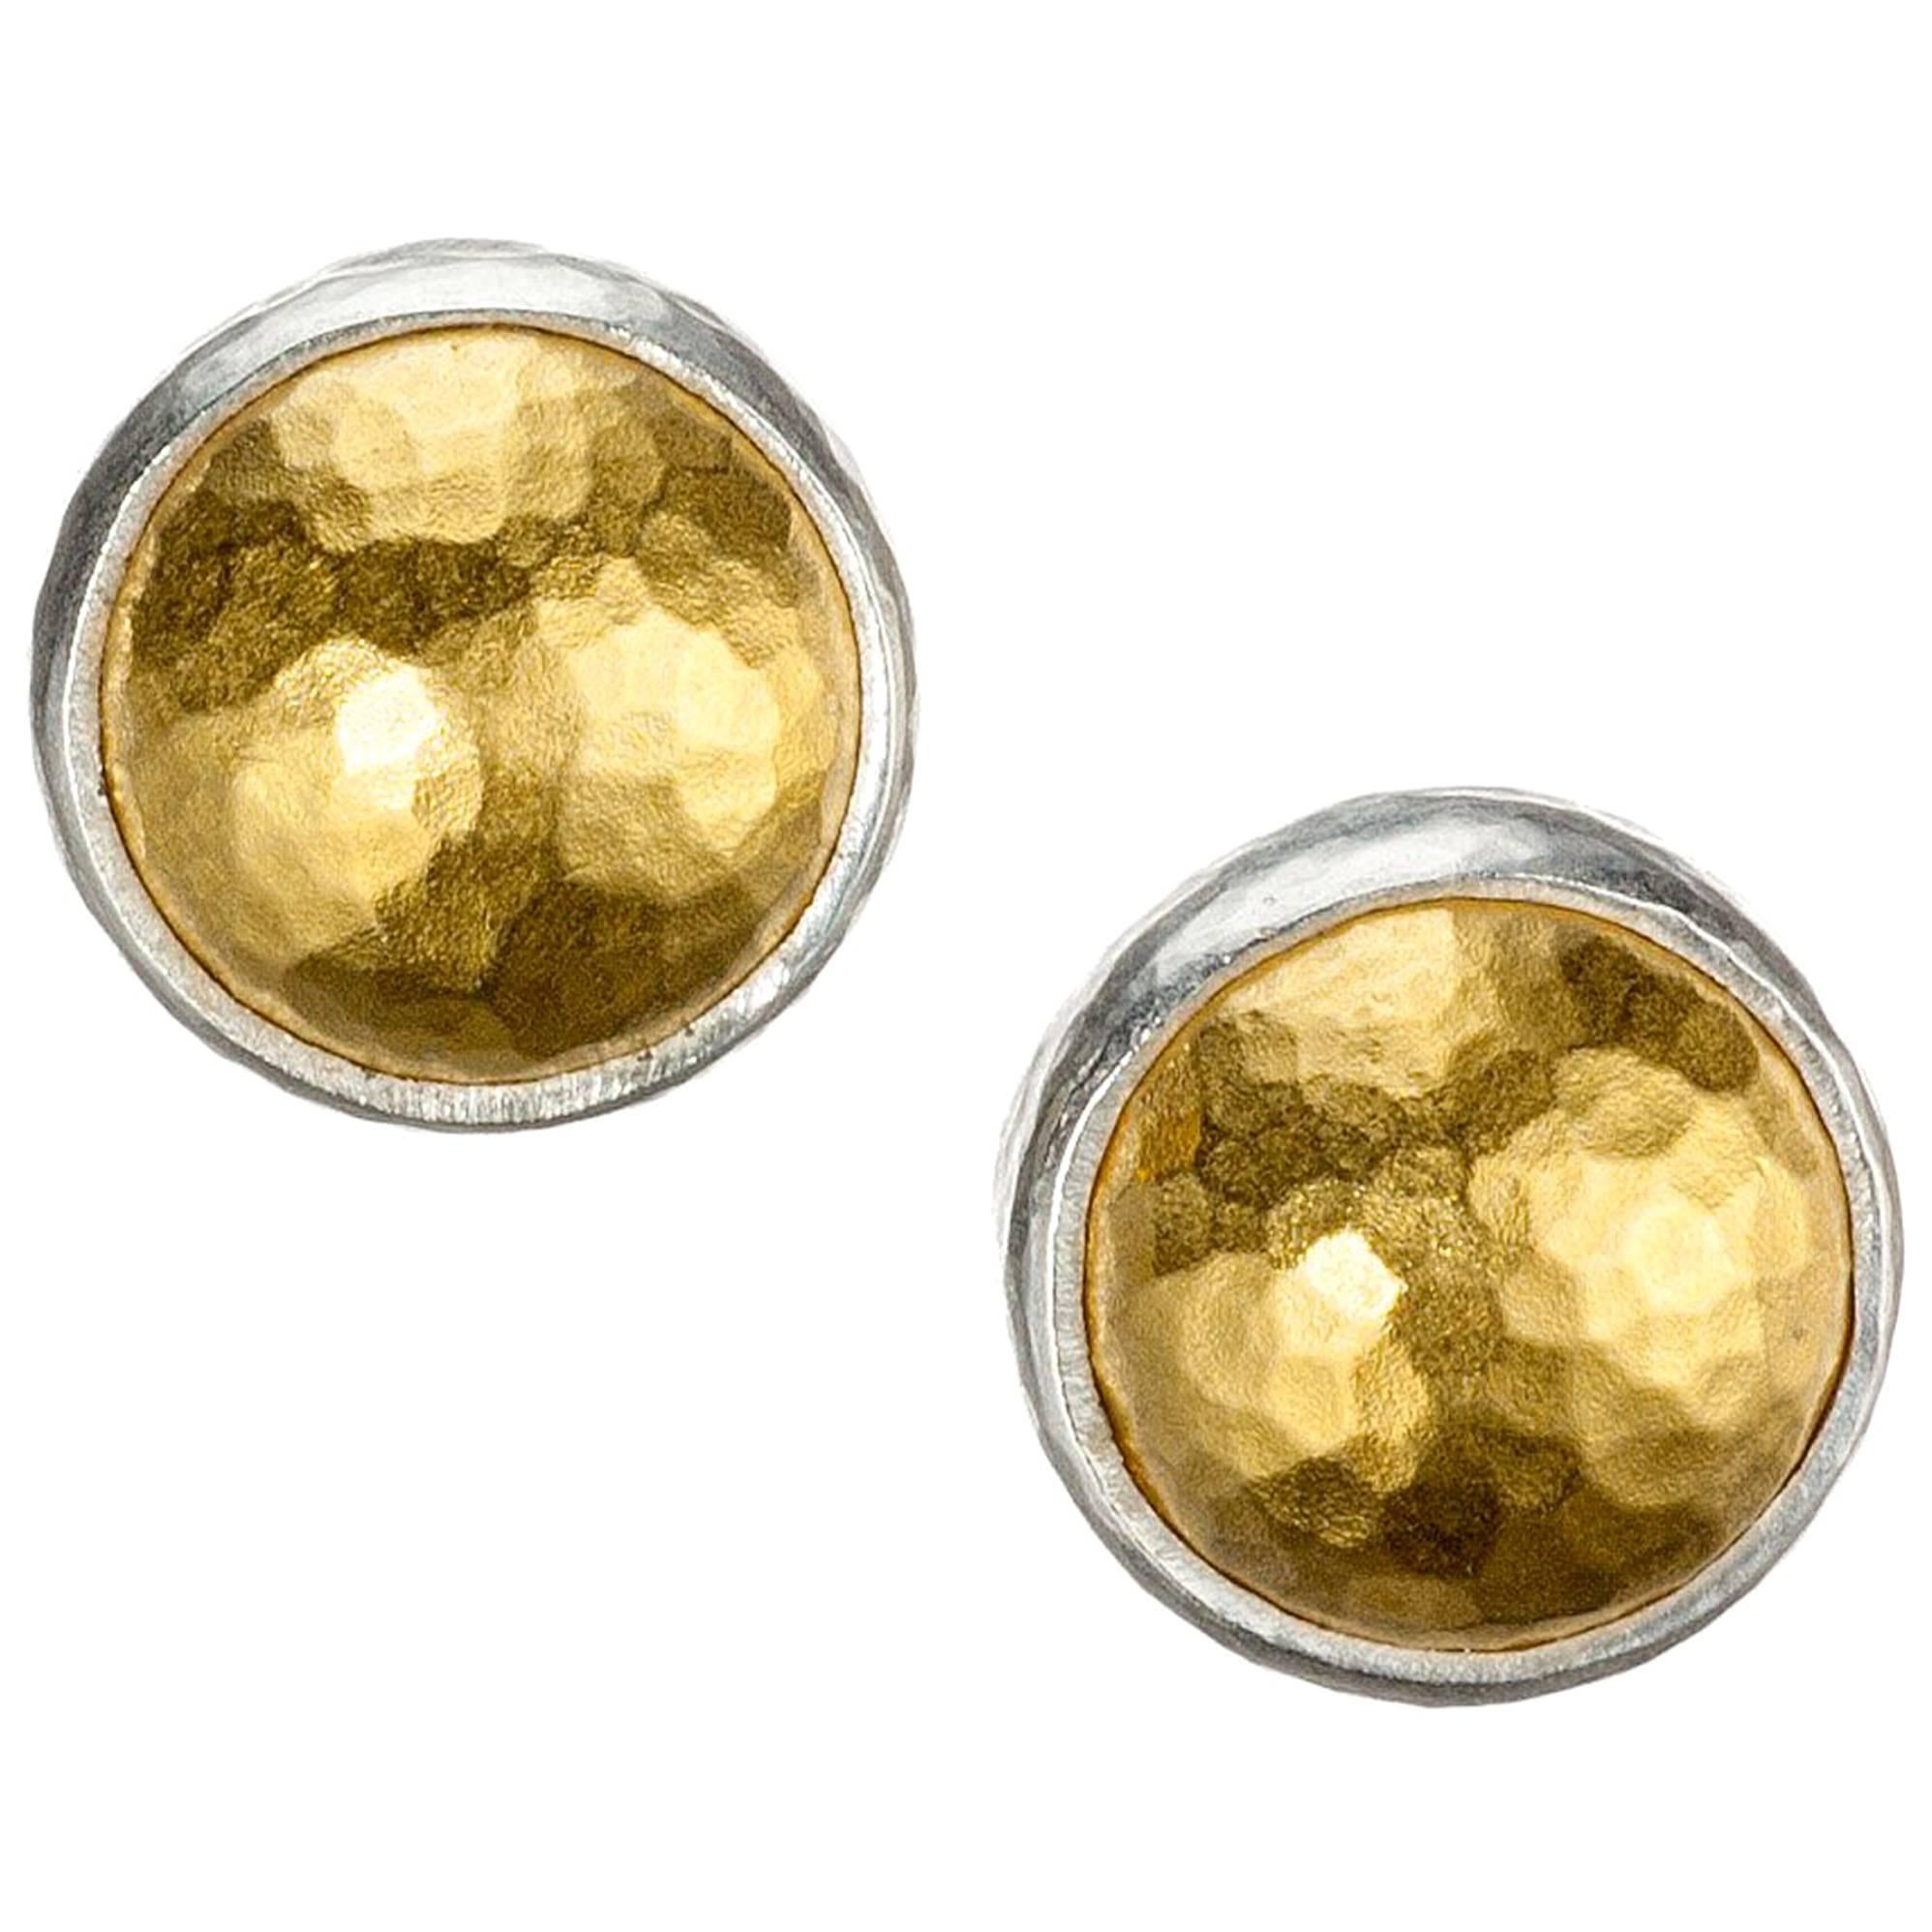 Gurhan “Amulet” Stud Earrings in 24 Karat Yellow Gold and Sterling Silver For Sale